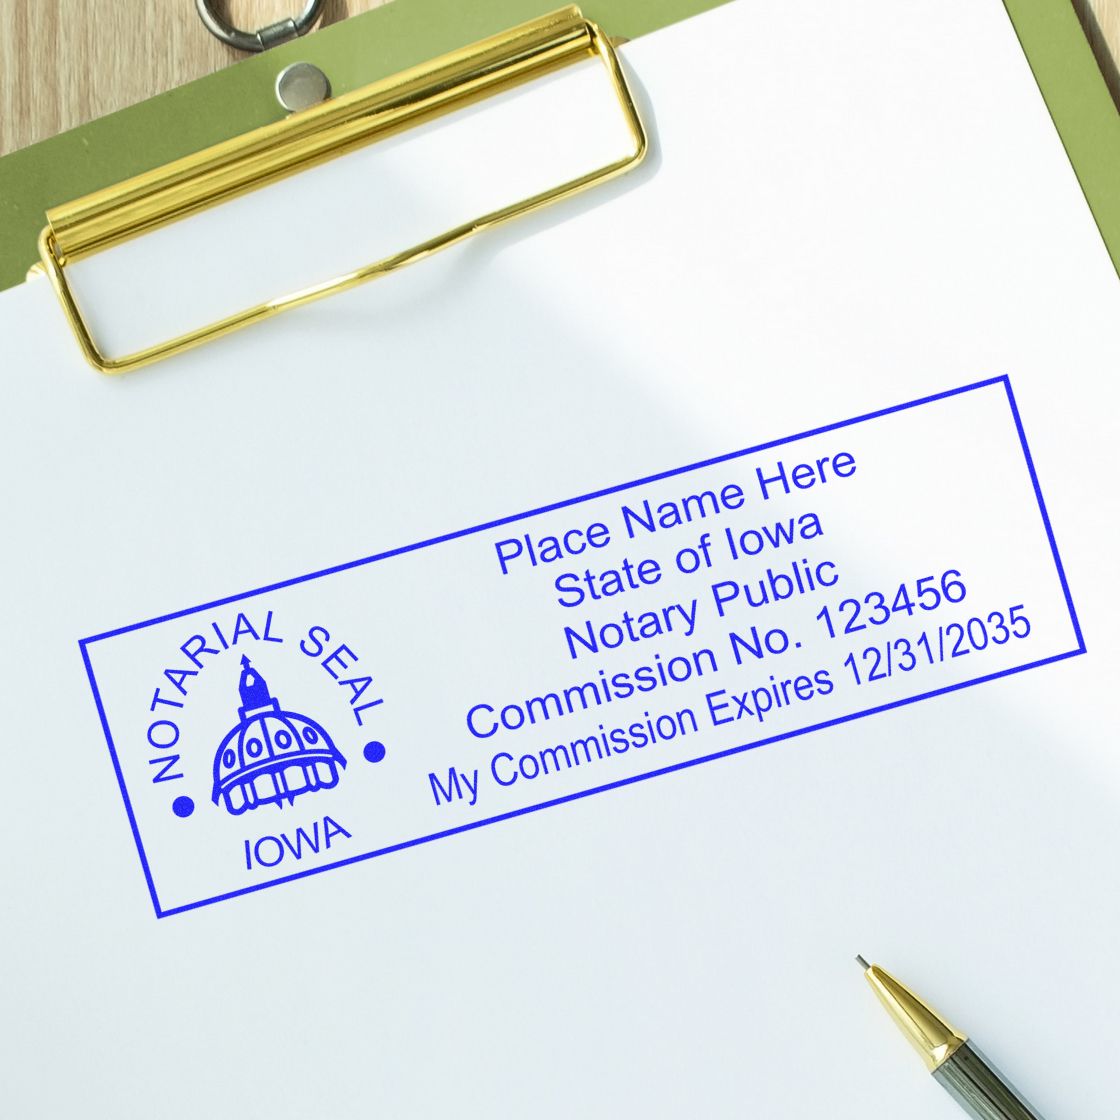 A stamped impression of the Super Slim Iowa Notary Public Stamp in this stylish lifestyle photo, setting the tone for a unique and personalized product.